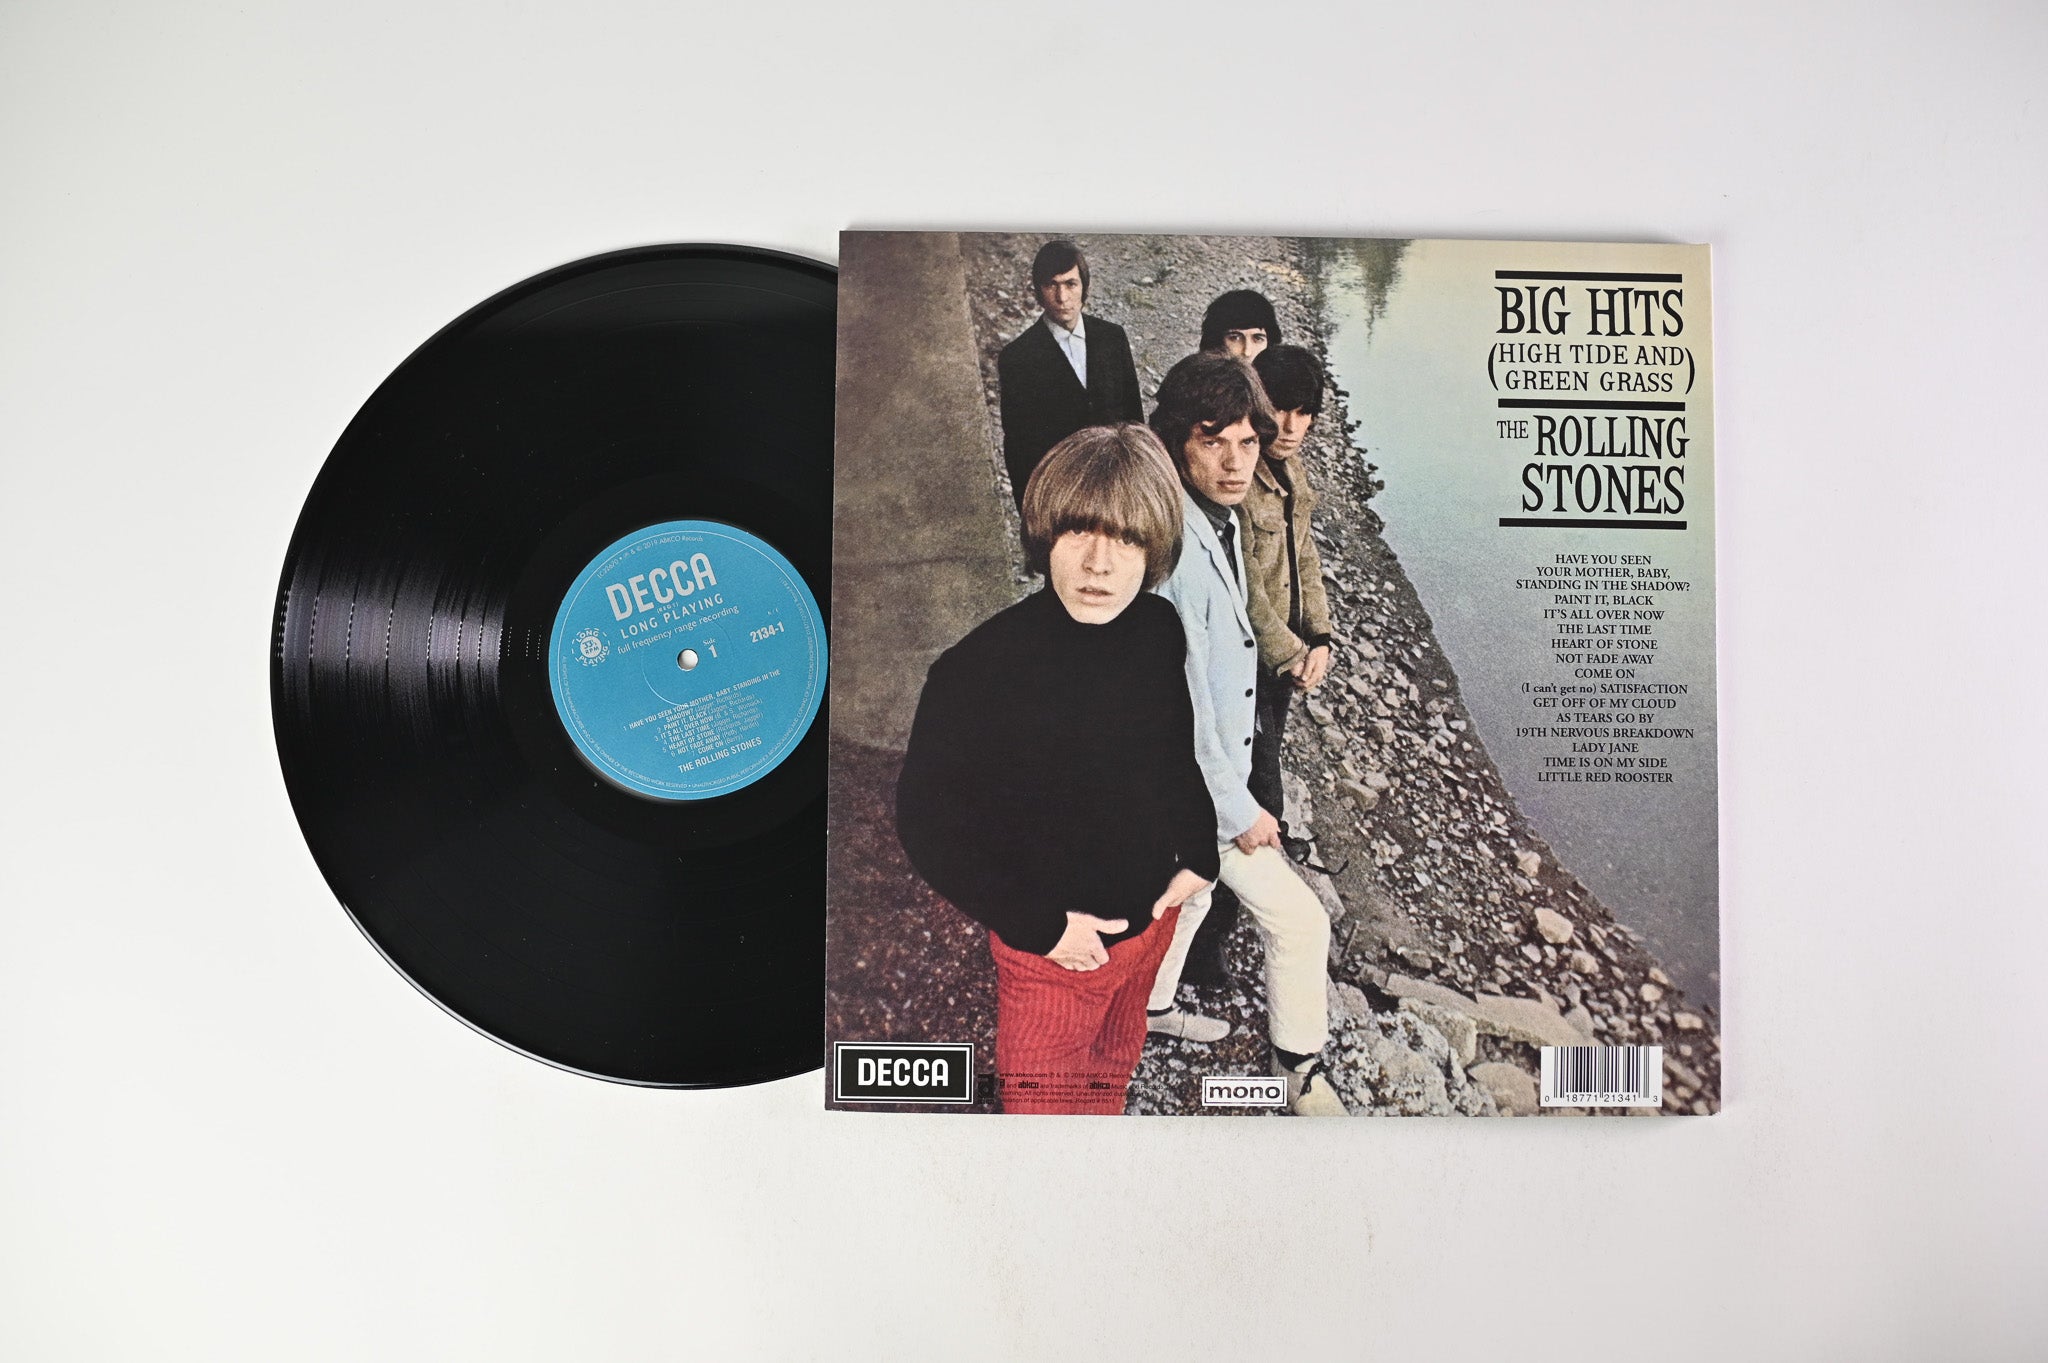 The Rolling Stones - Big Hits (High Tide And Green Grass) Reissue on ABKCO/Decca